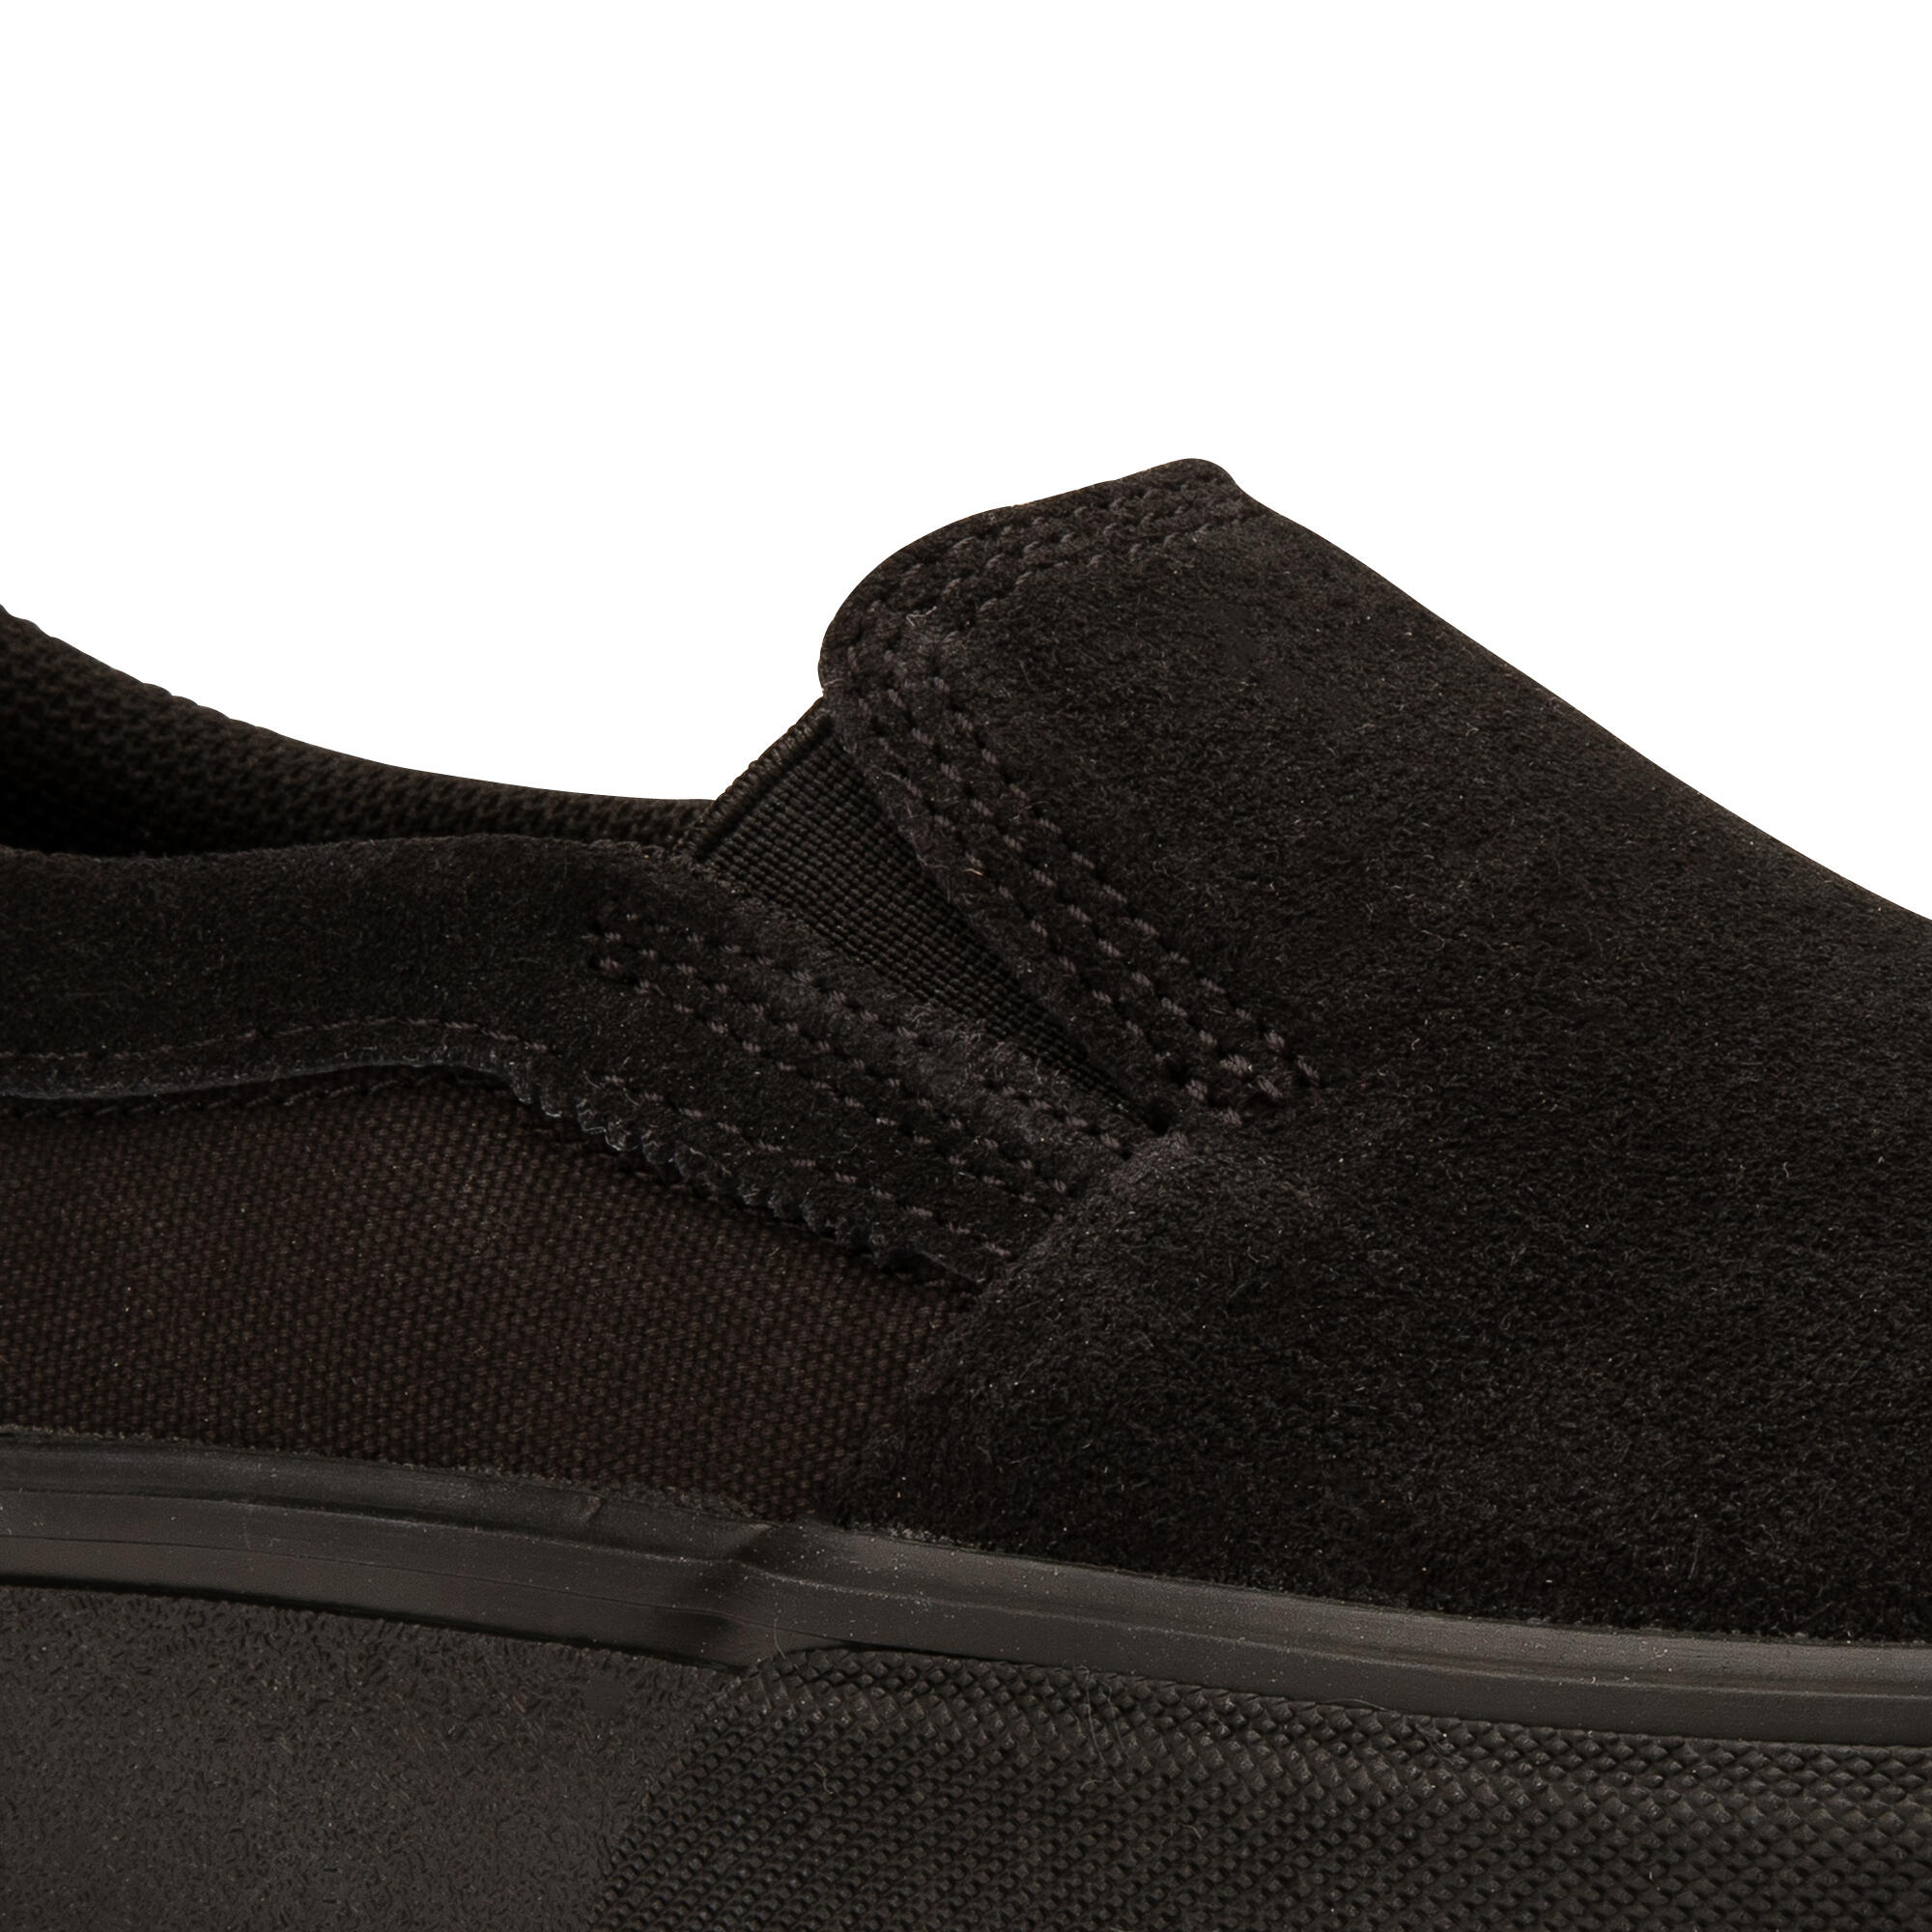 Adult Low-Top Slip-On Skate Shoes Without Laces Vulca 500 - Black 11/19